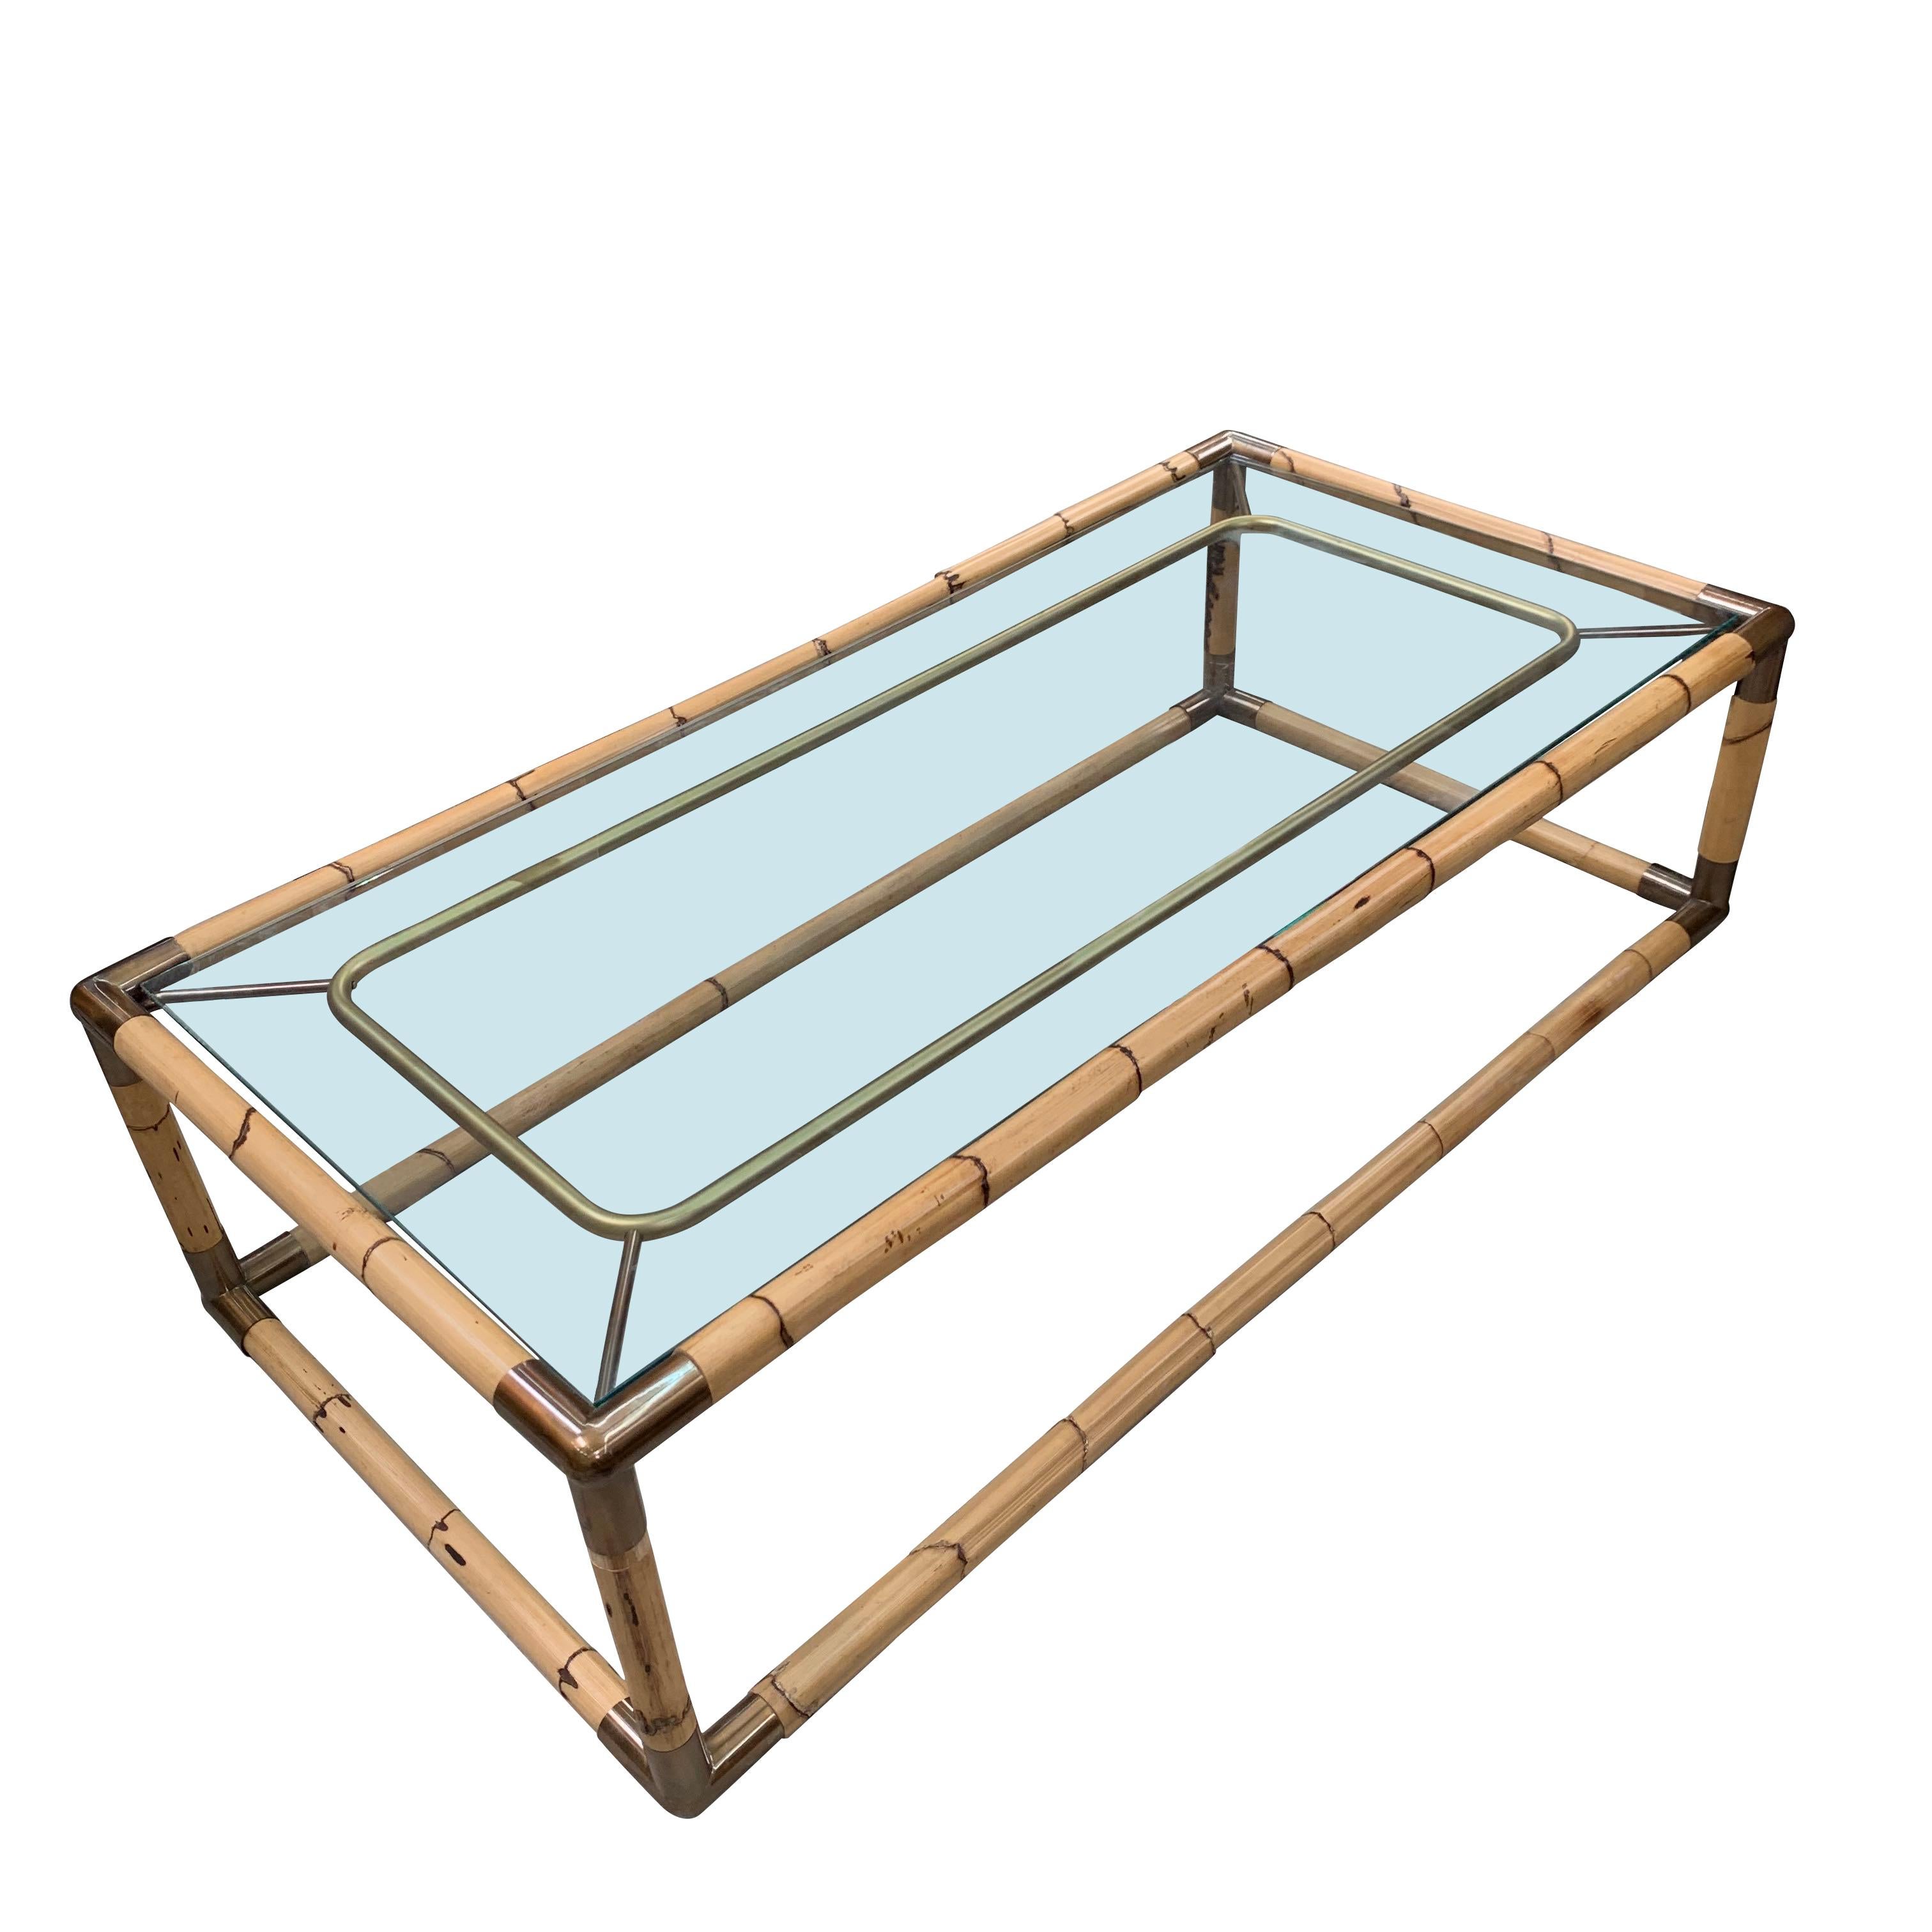 Midcentury French glass top coffee table with bamboo frame
Brass corner decorative details.
   